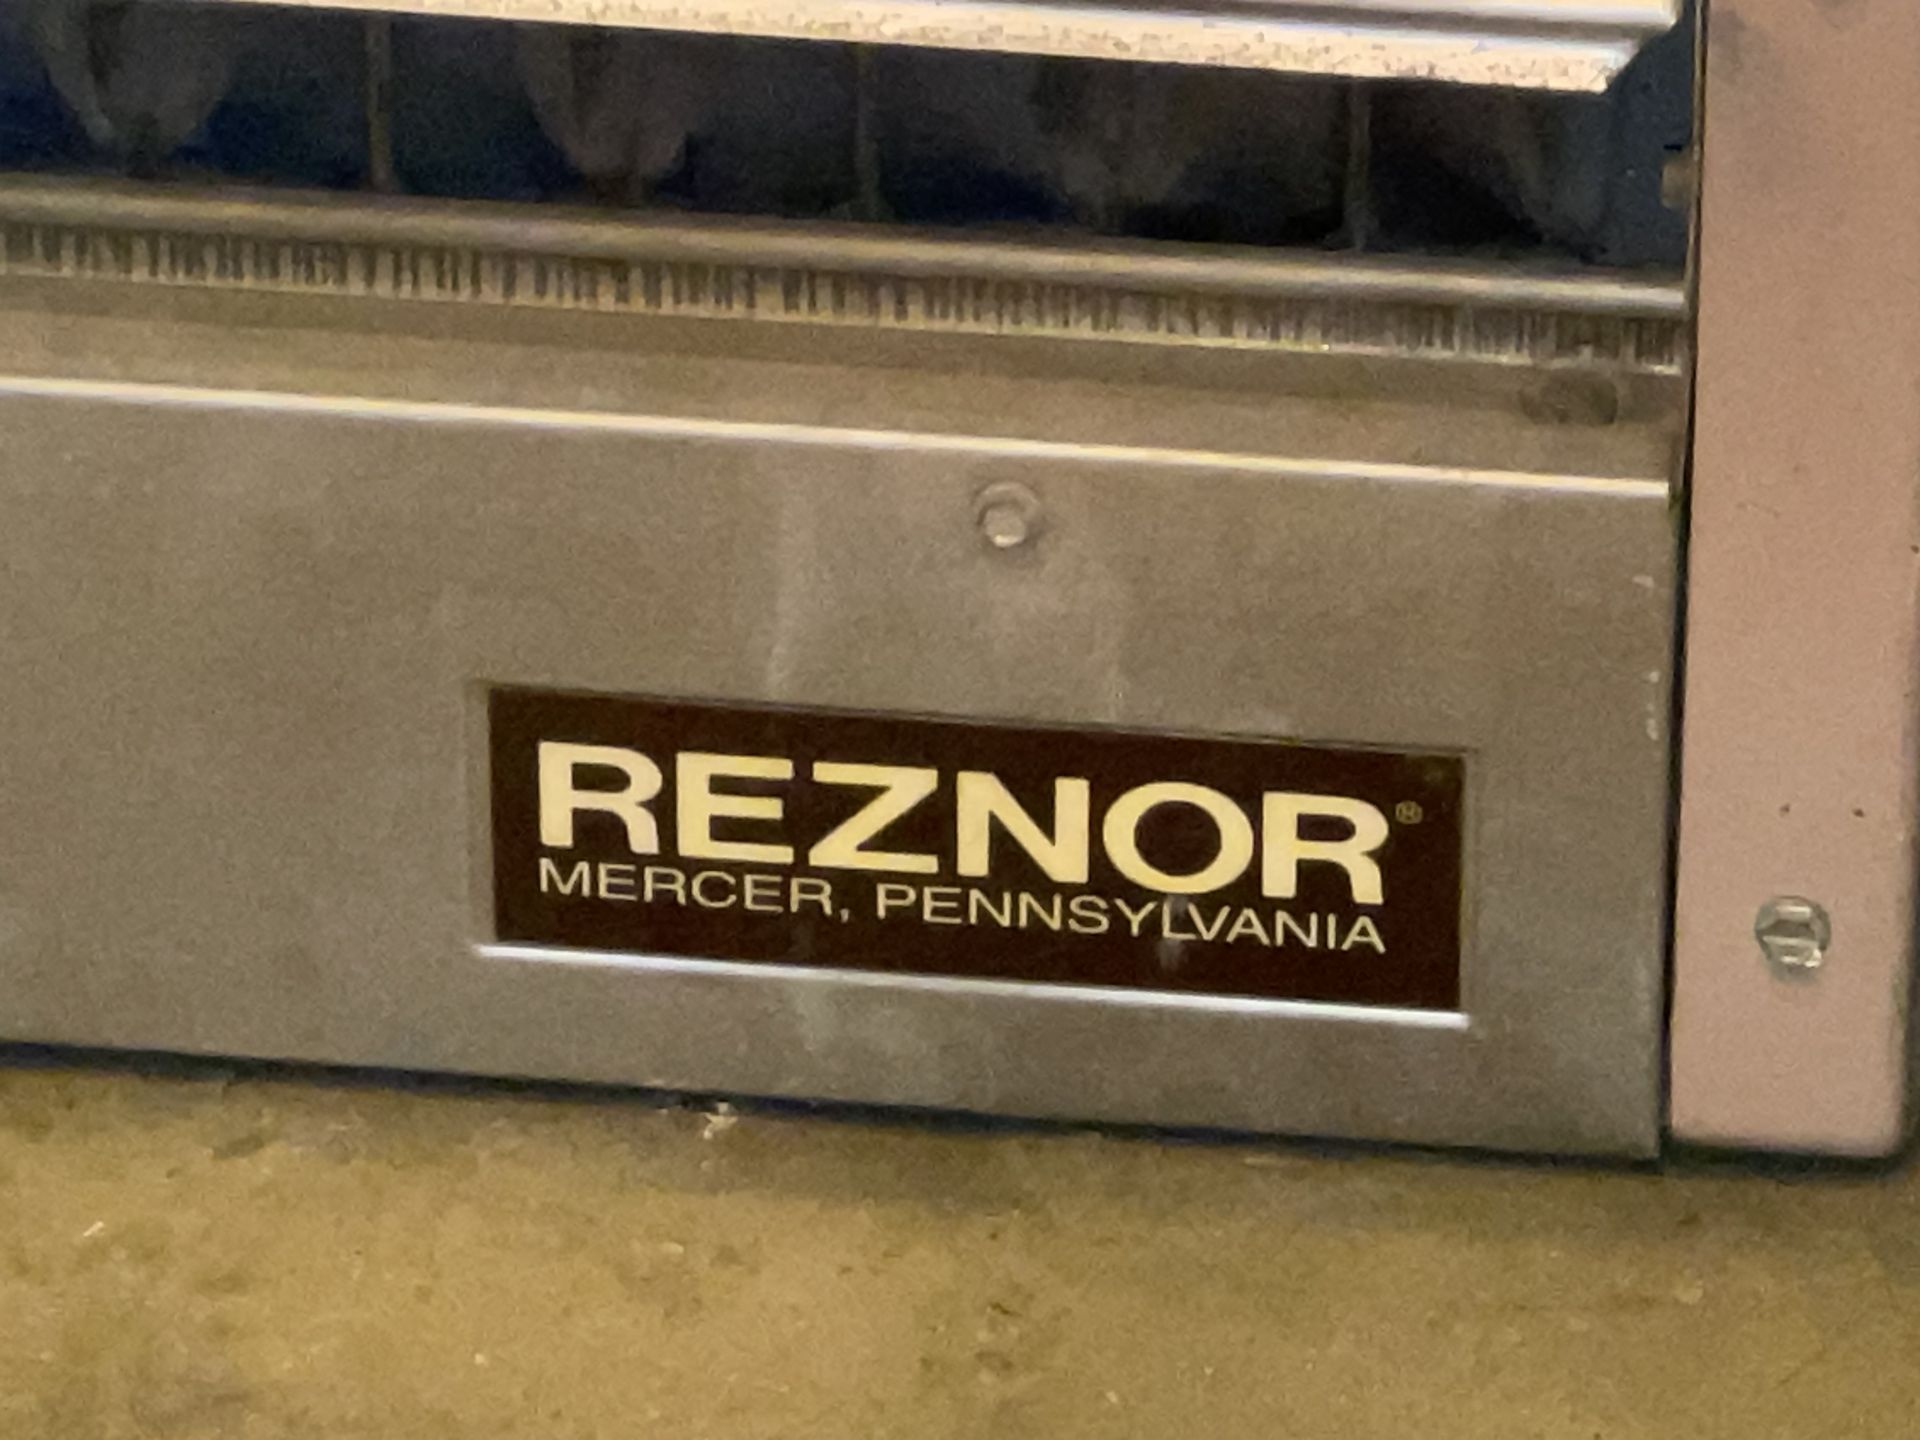 Lot of 3 Reznor Unit Heaters (BS73) - Image 8 of 12